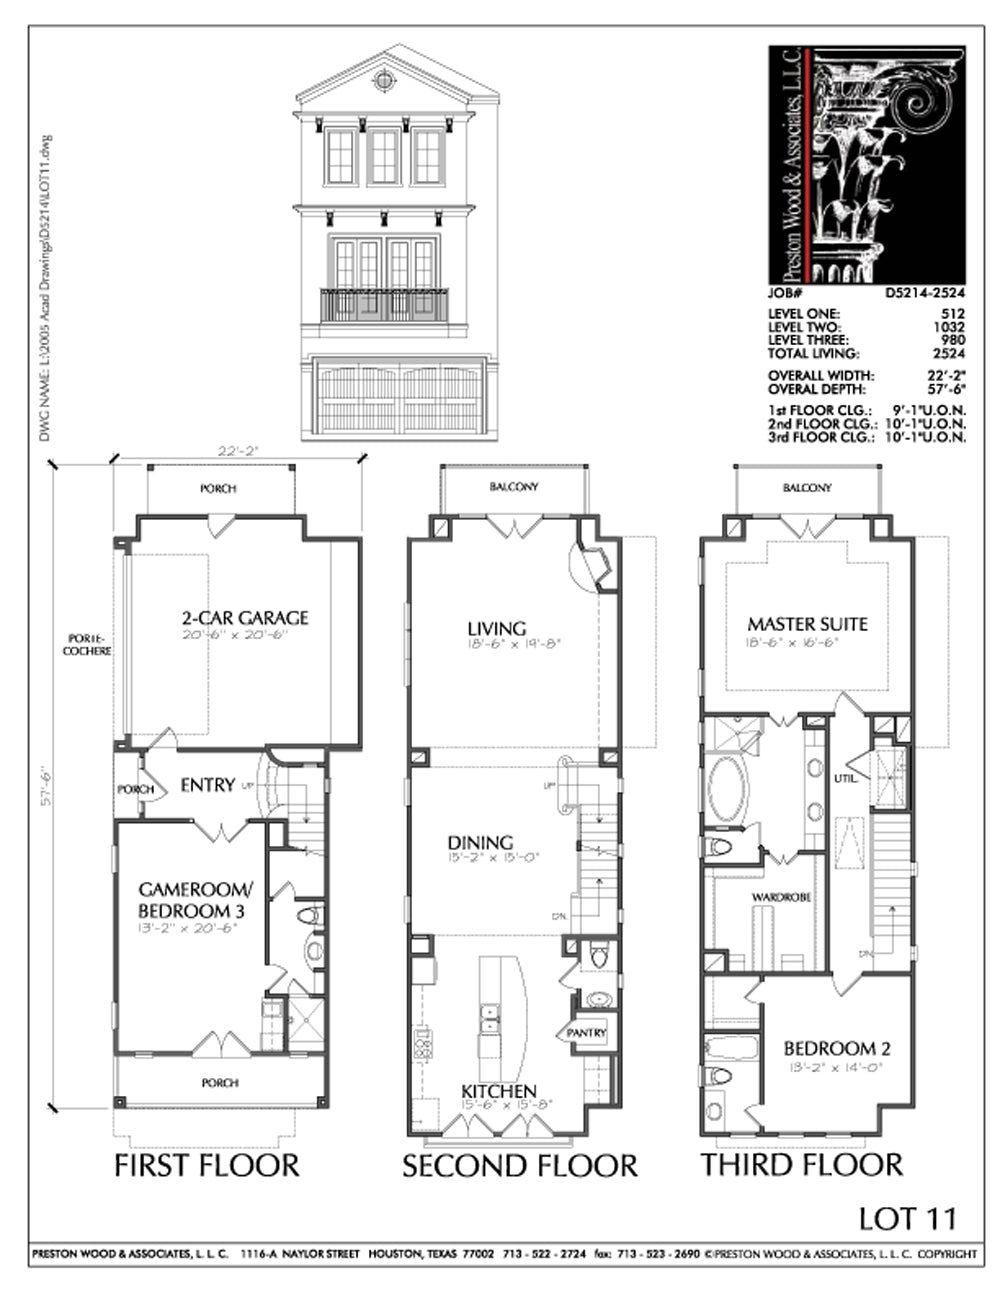 Townhomes Townhouse Floor Plans Urban Row House Plan Designers